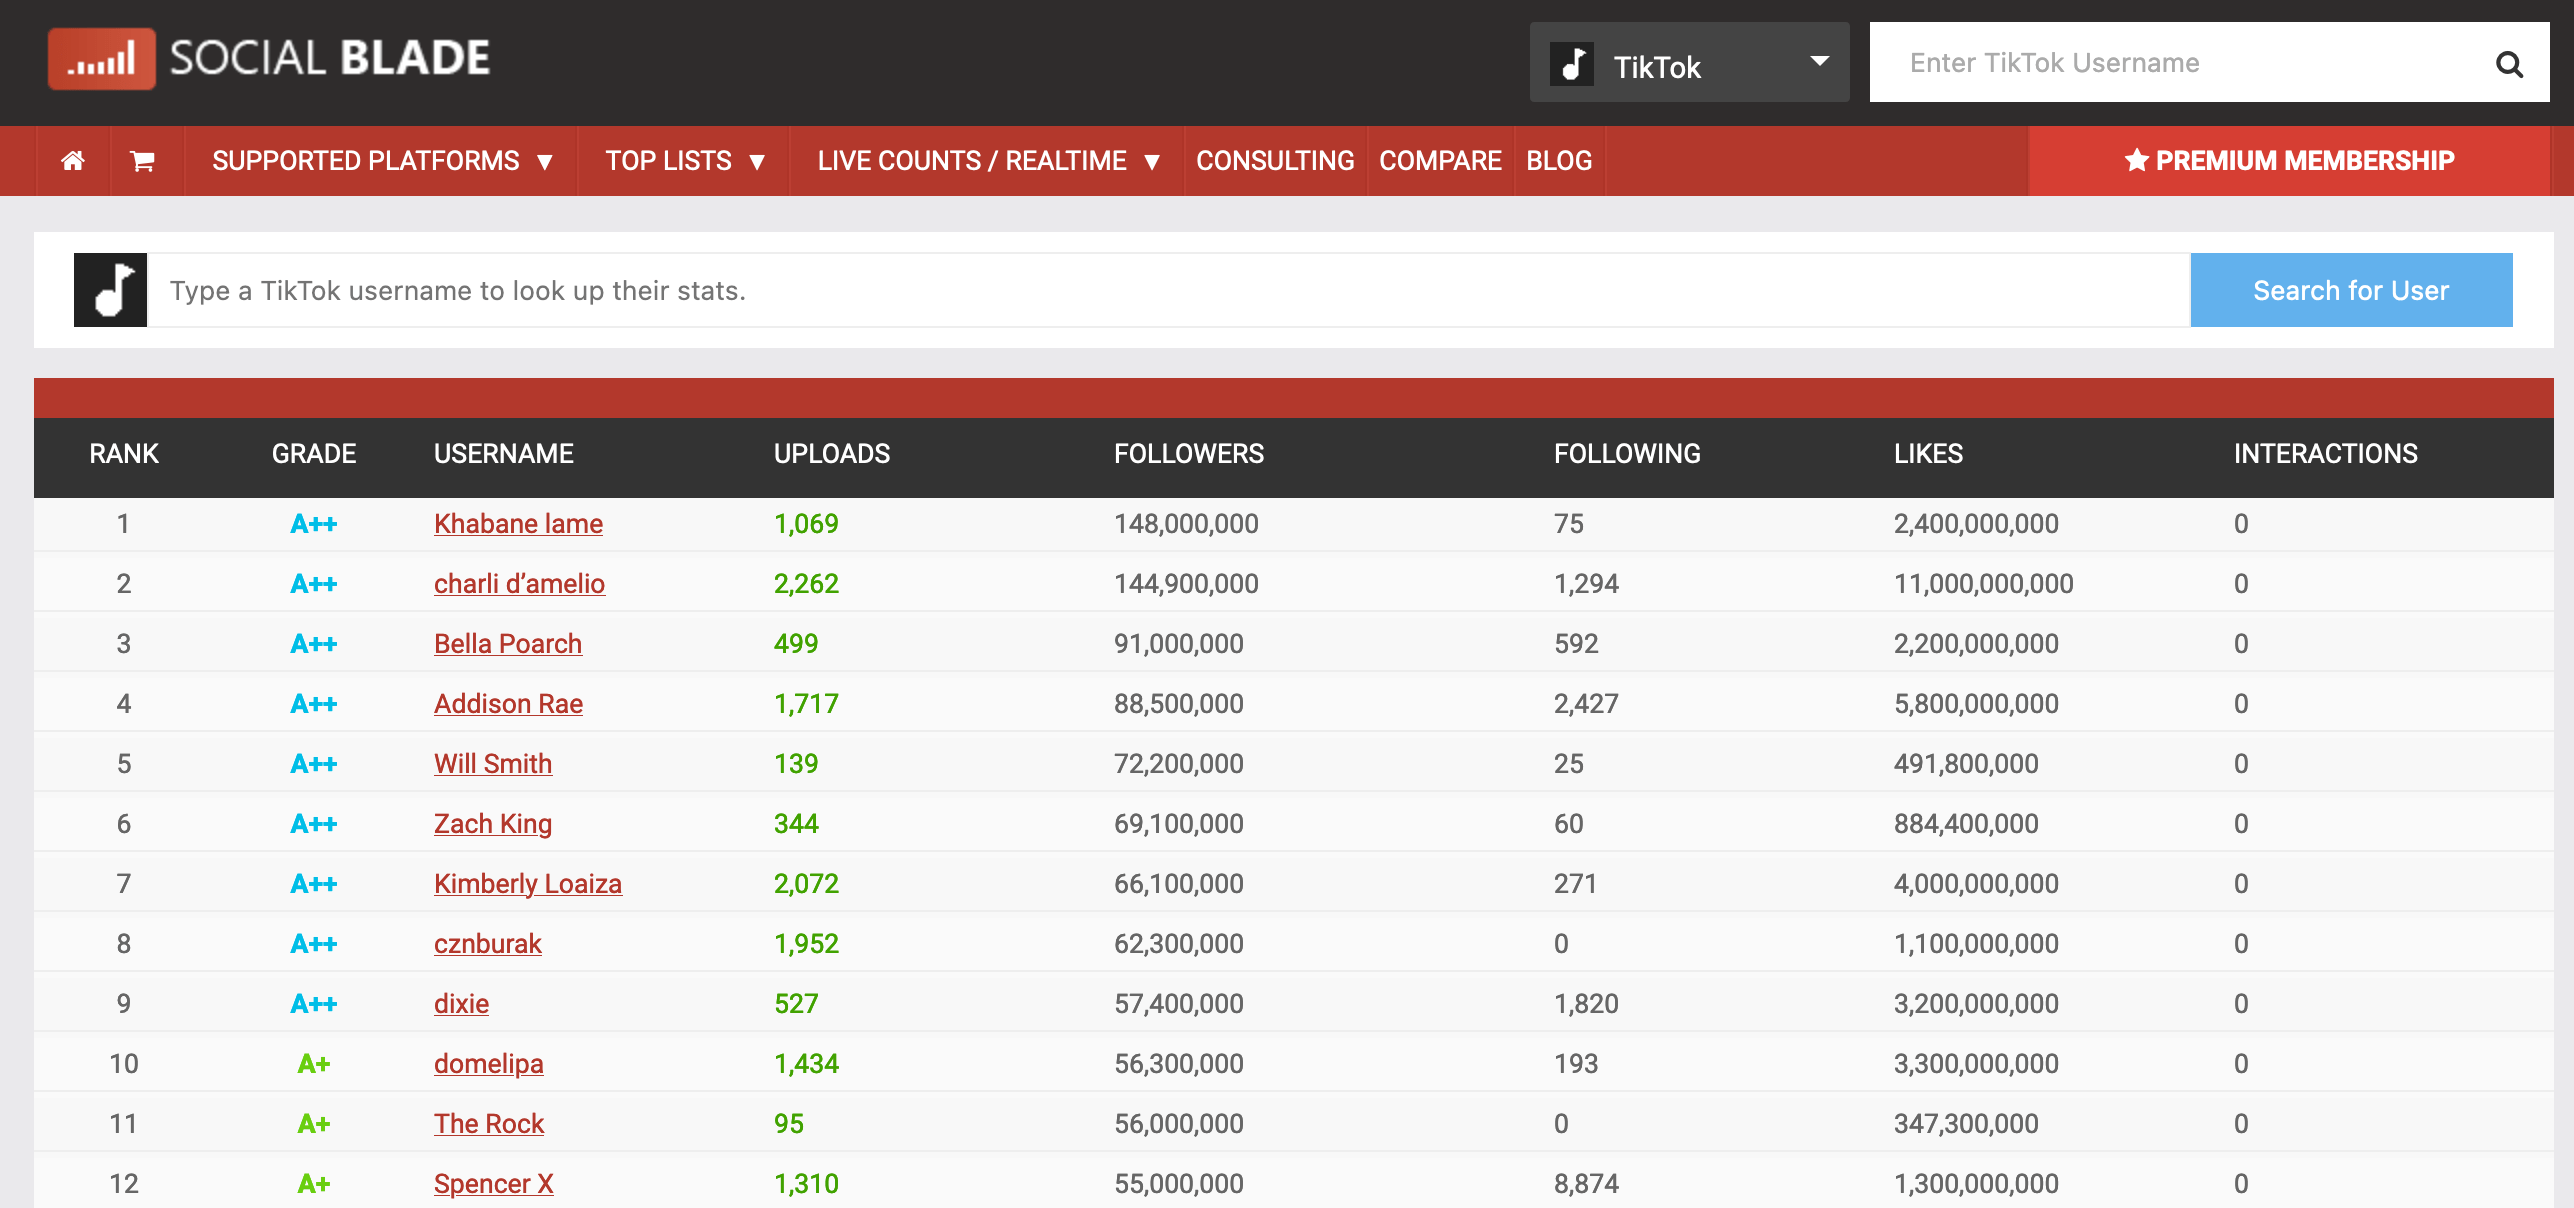 List of TikTok accounts with corresponding data on uploads, no. of followers, etc., in Social Blade